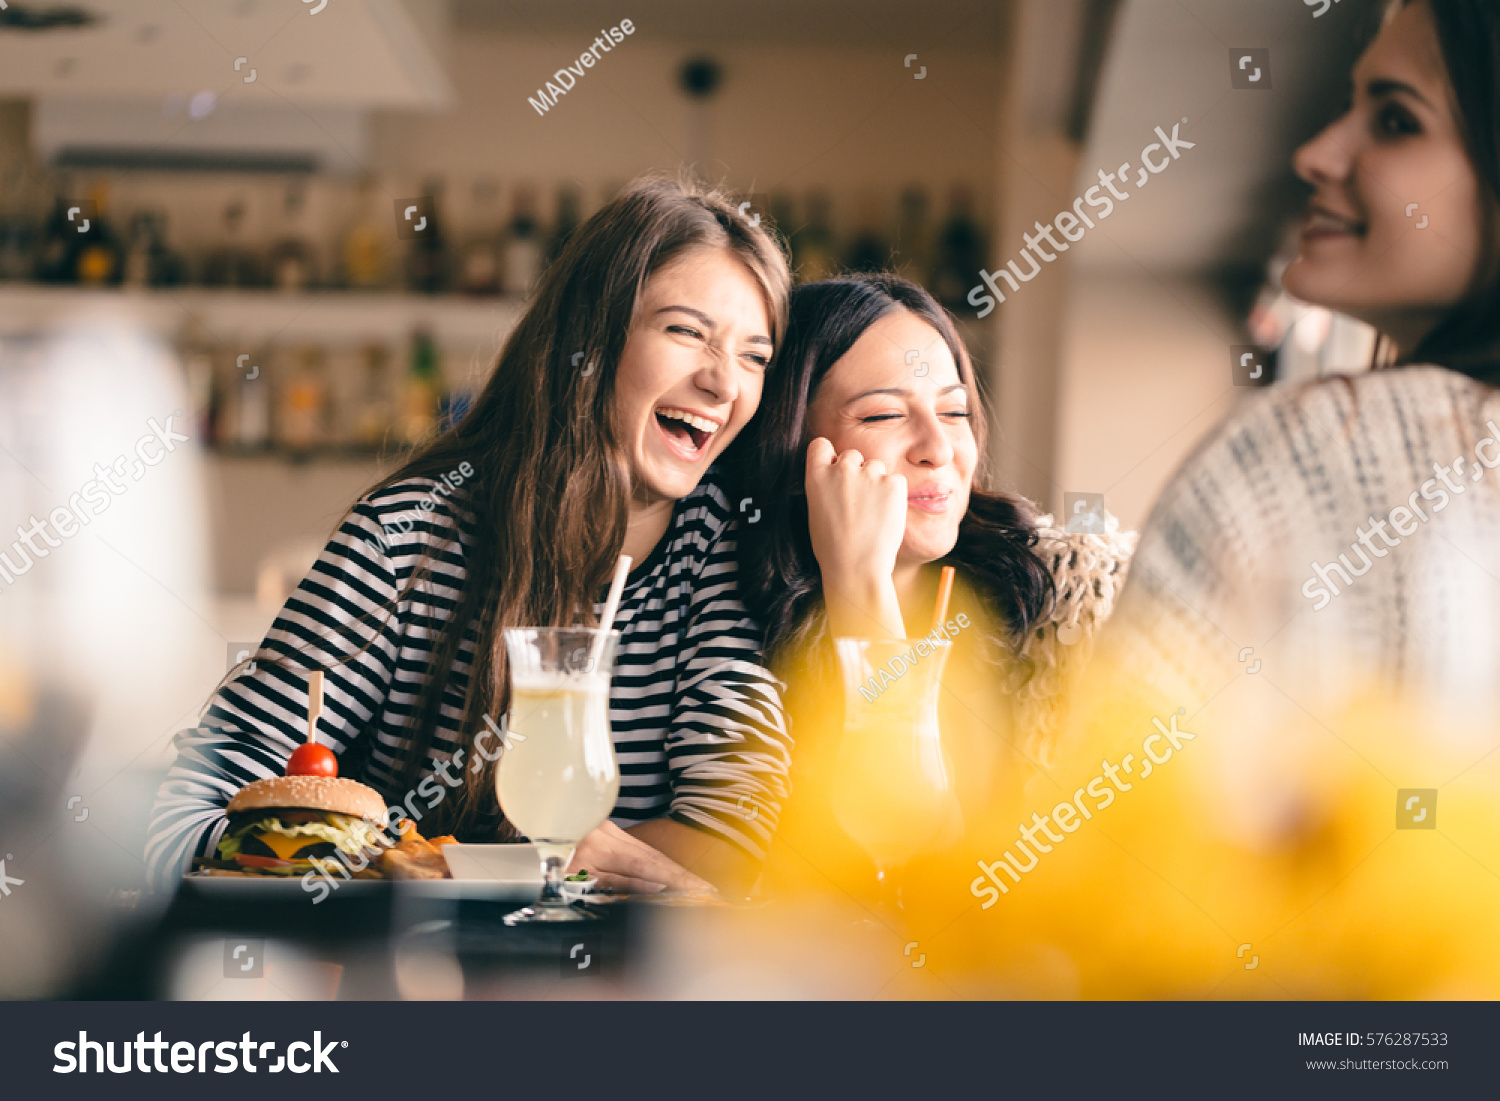 Old Friends Meeting After Long Time Stock Photo 576287533 ...